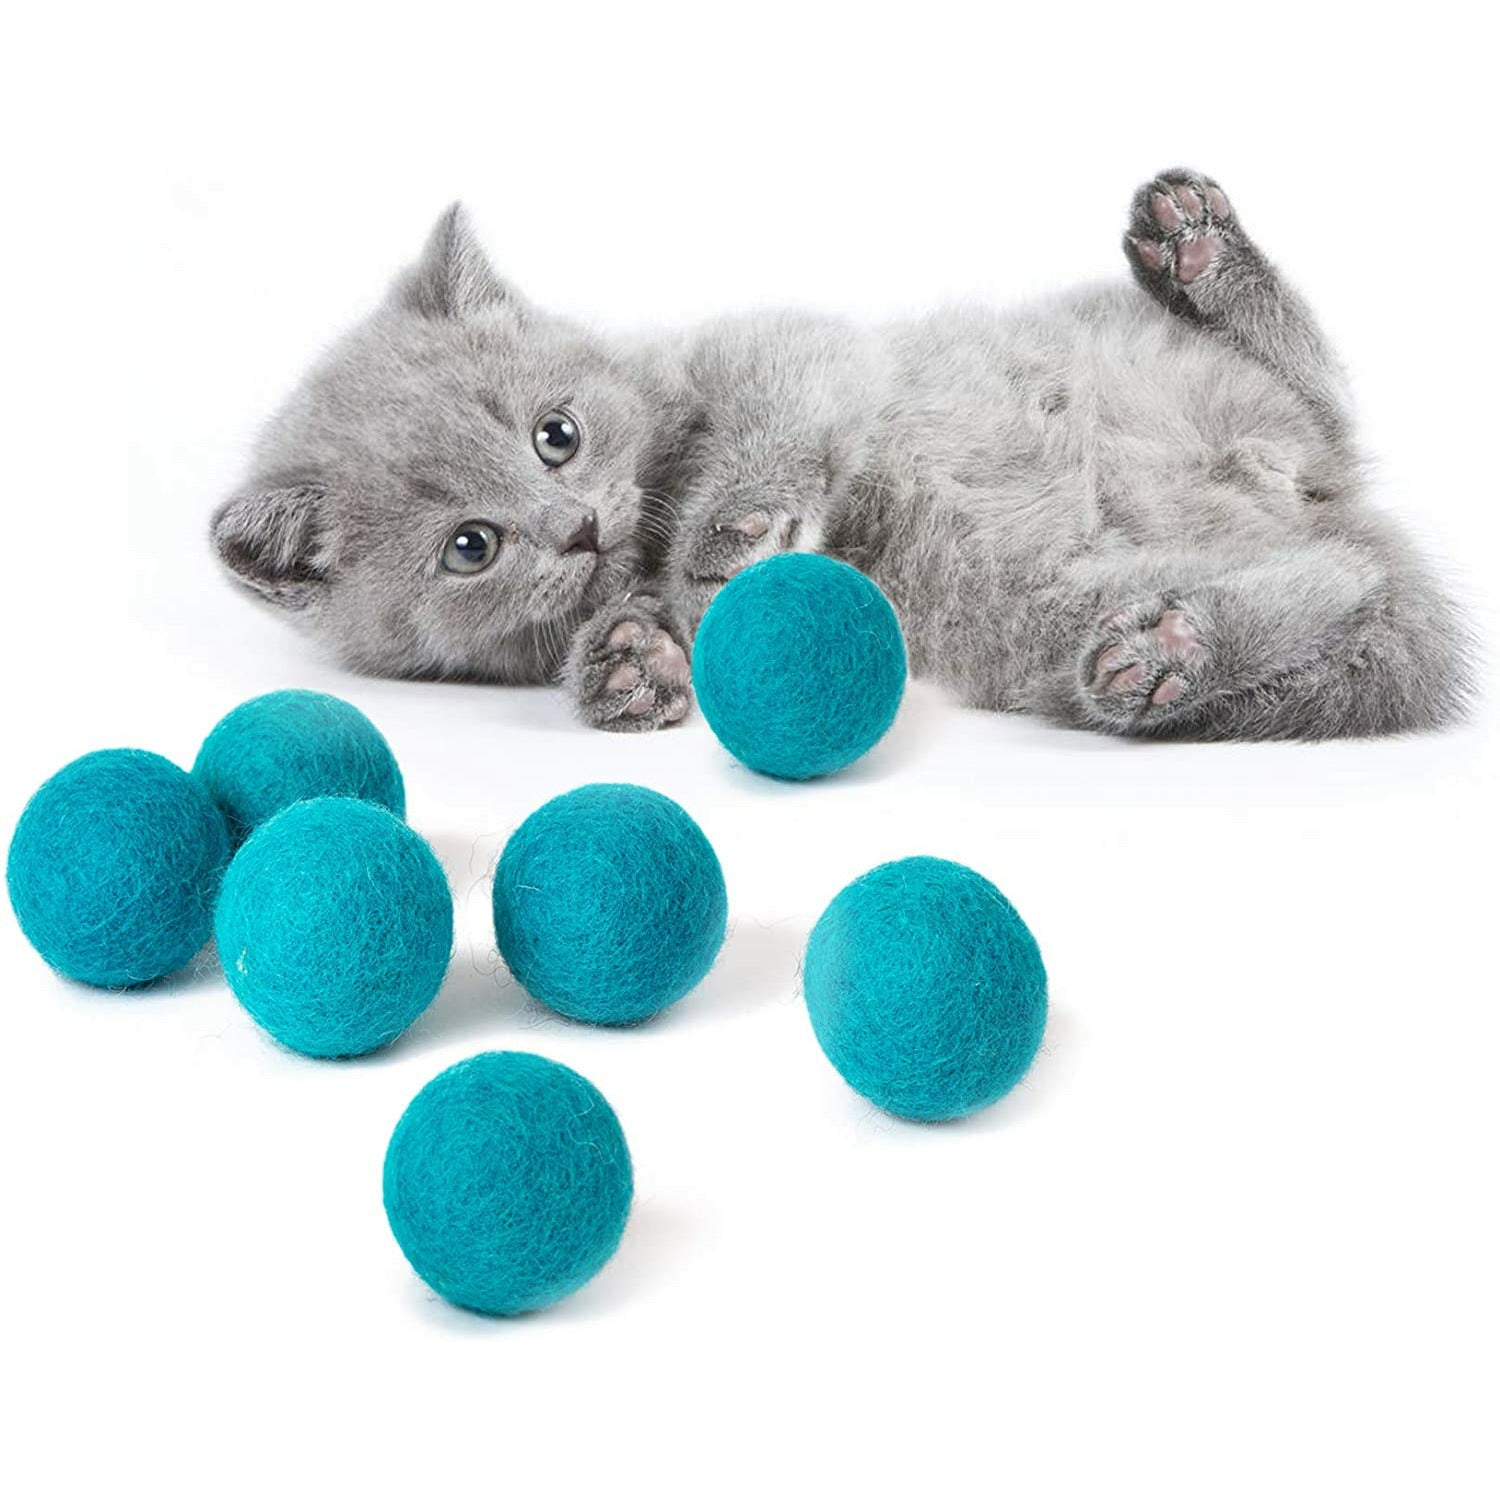 are wool balls safe for dogs-felted wool dog toys-felted wool dog toys-wool cat toys-boiled wool dog toys-small dog balls-wool dog toy-cat ball toy